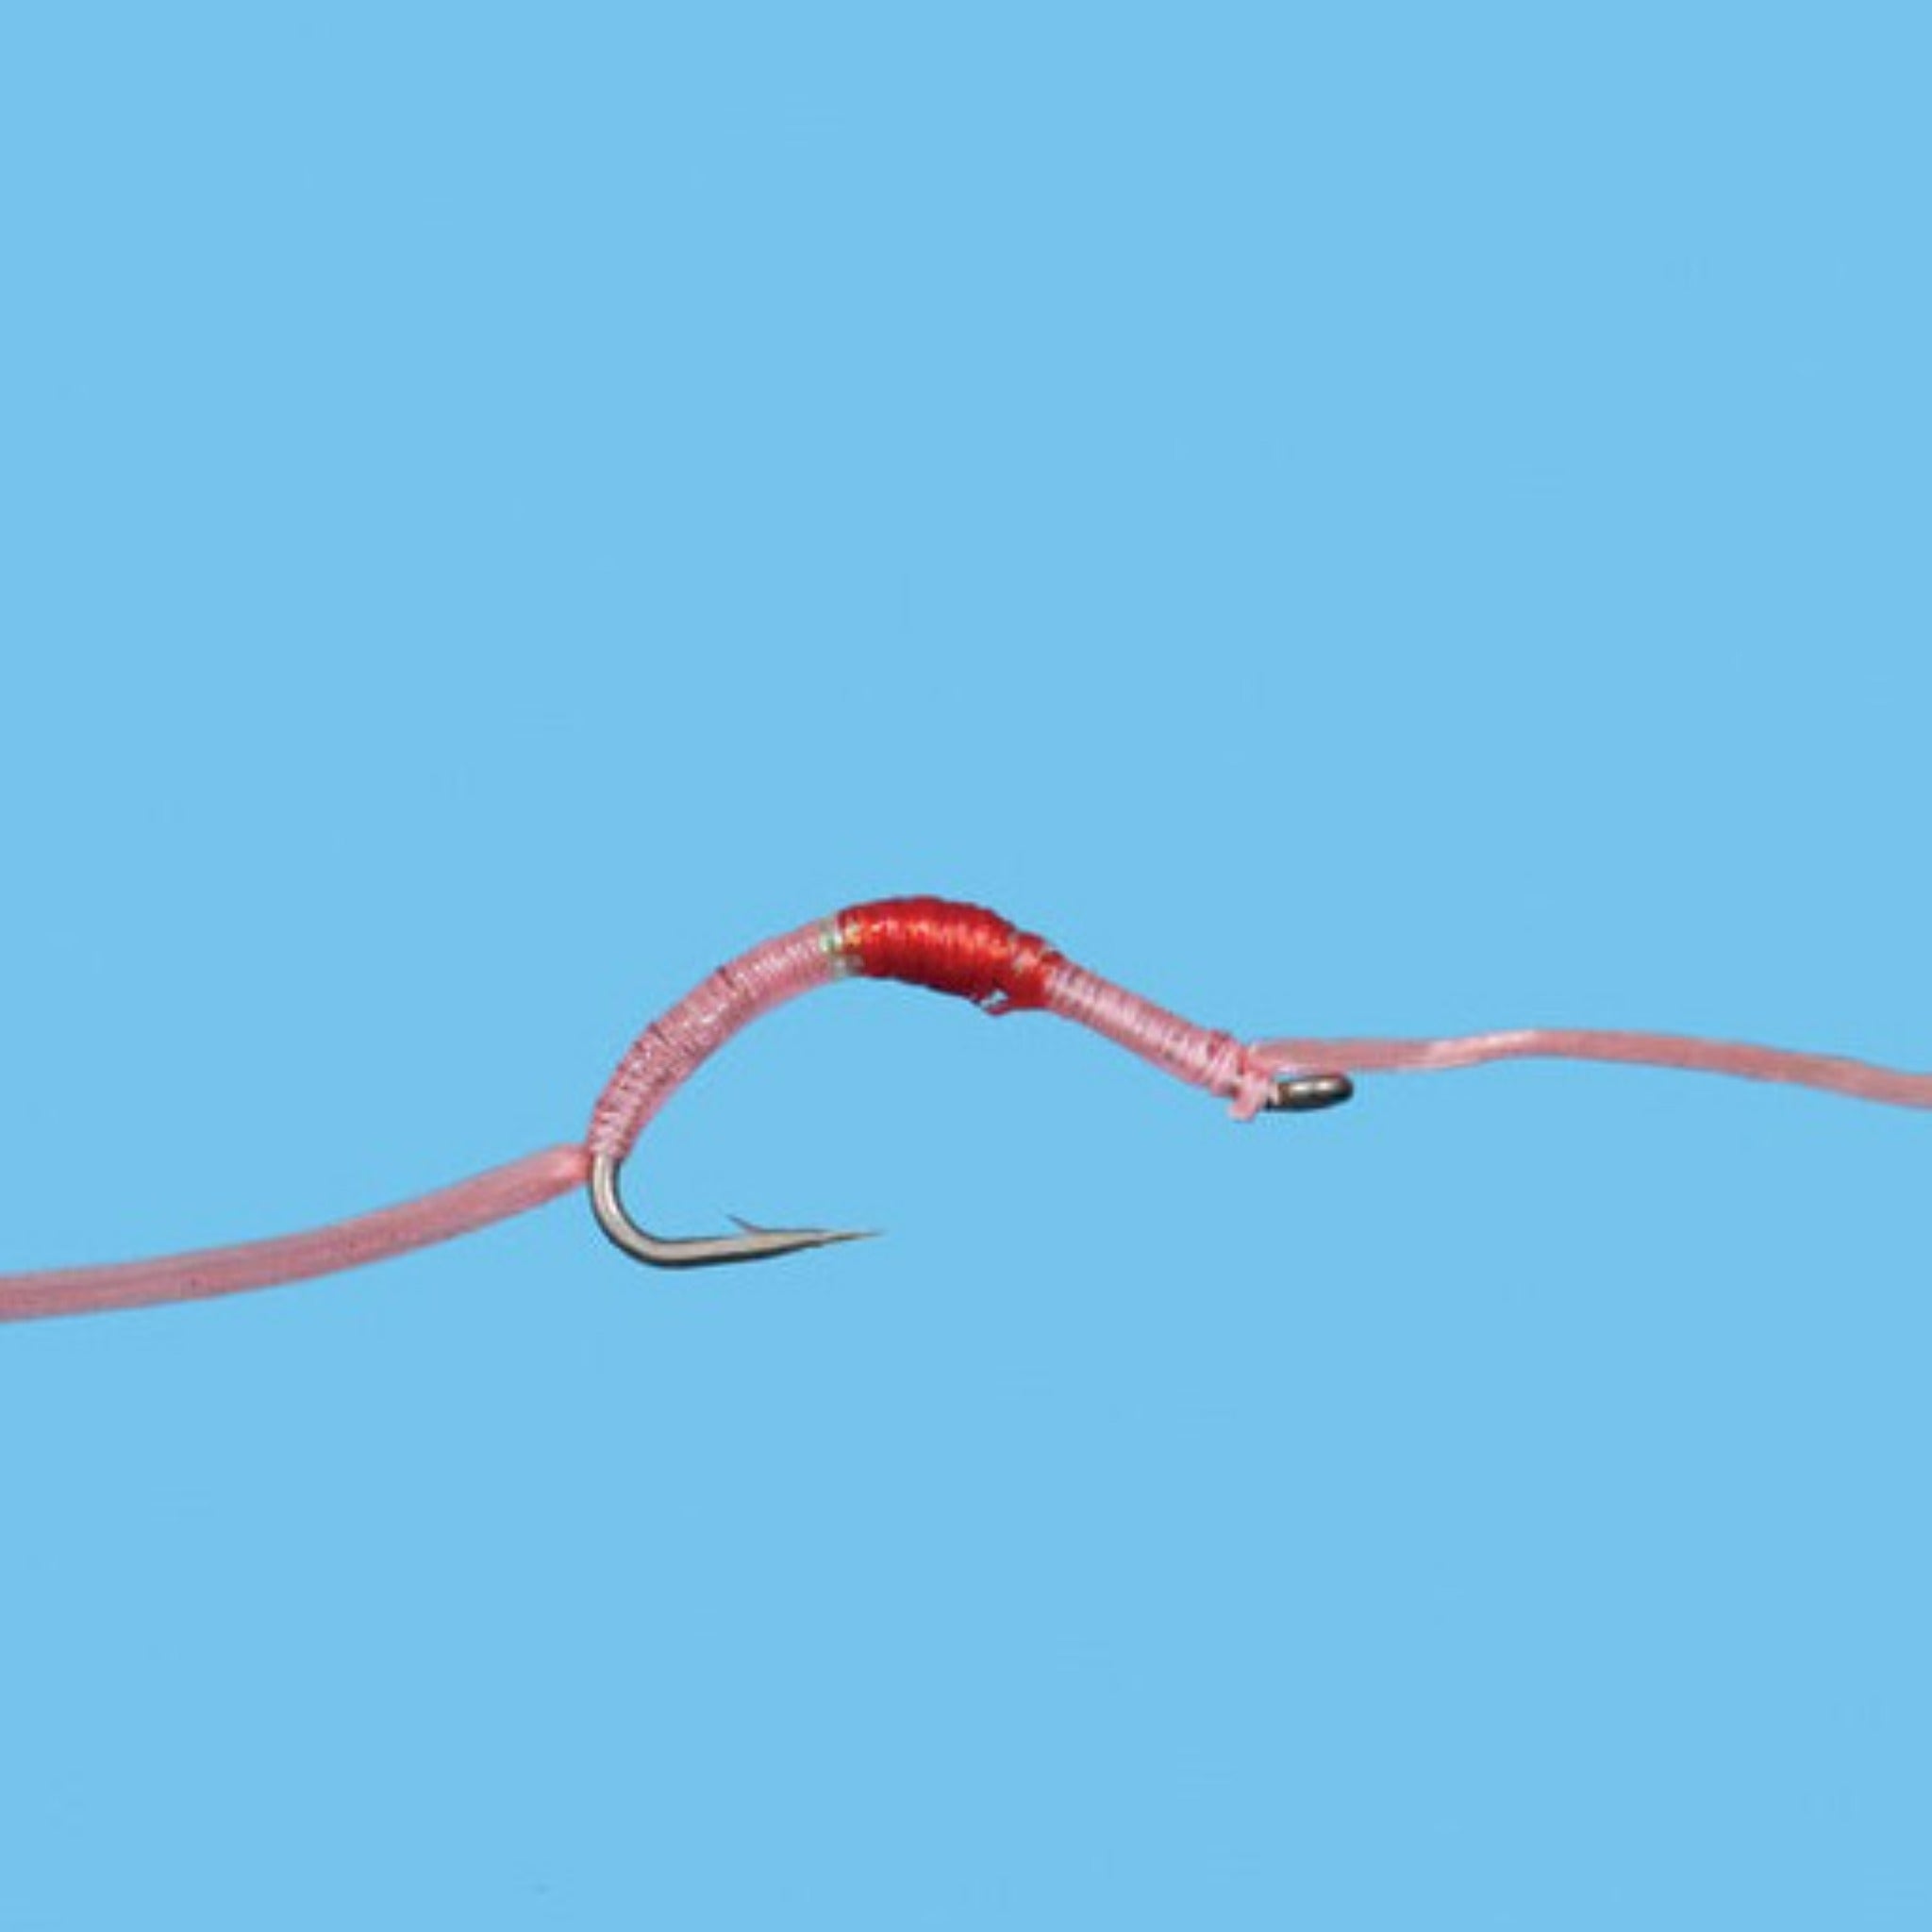 Flossy Worm - ( SOLITUDE FLY) - Blue Quill Angler